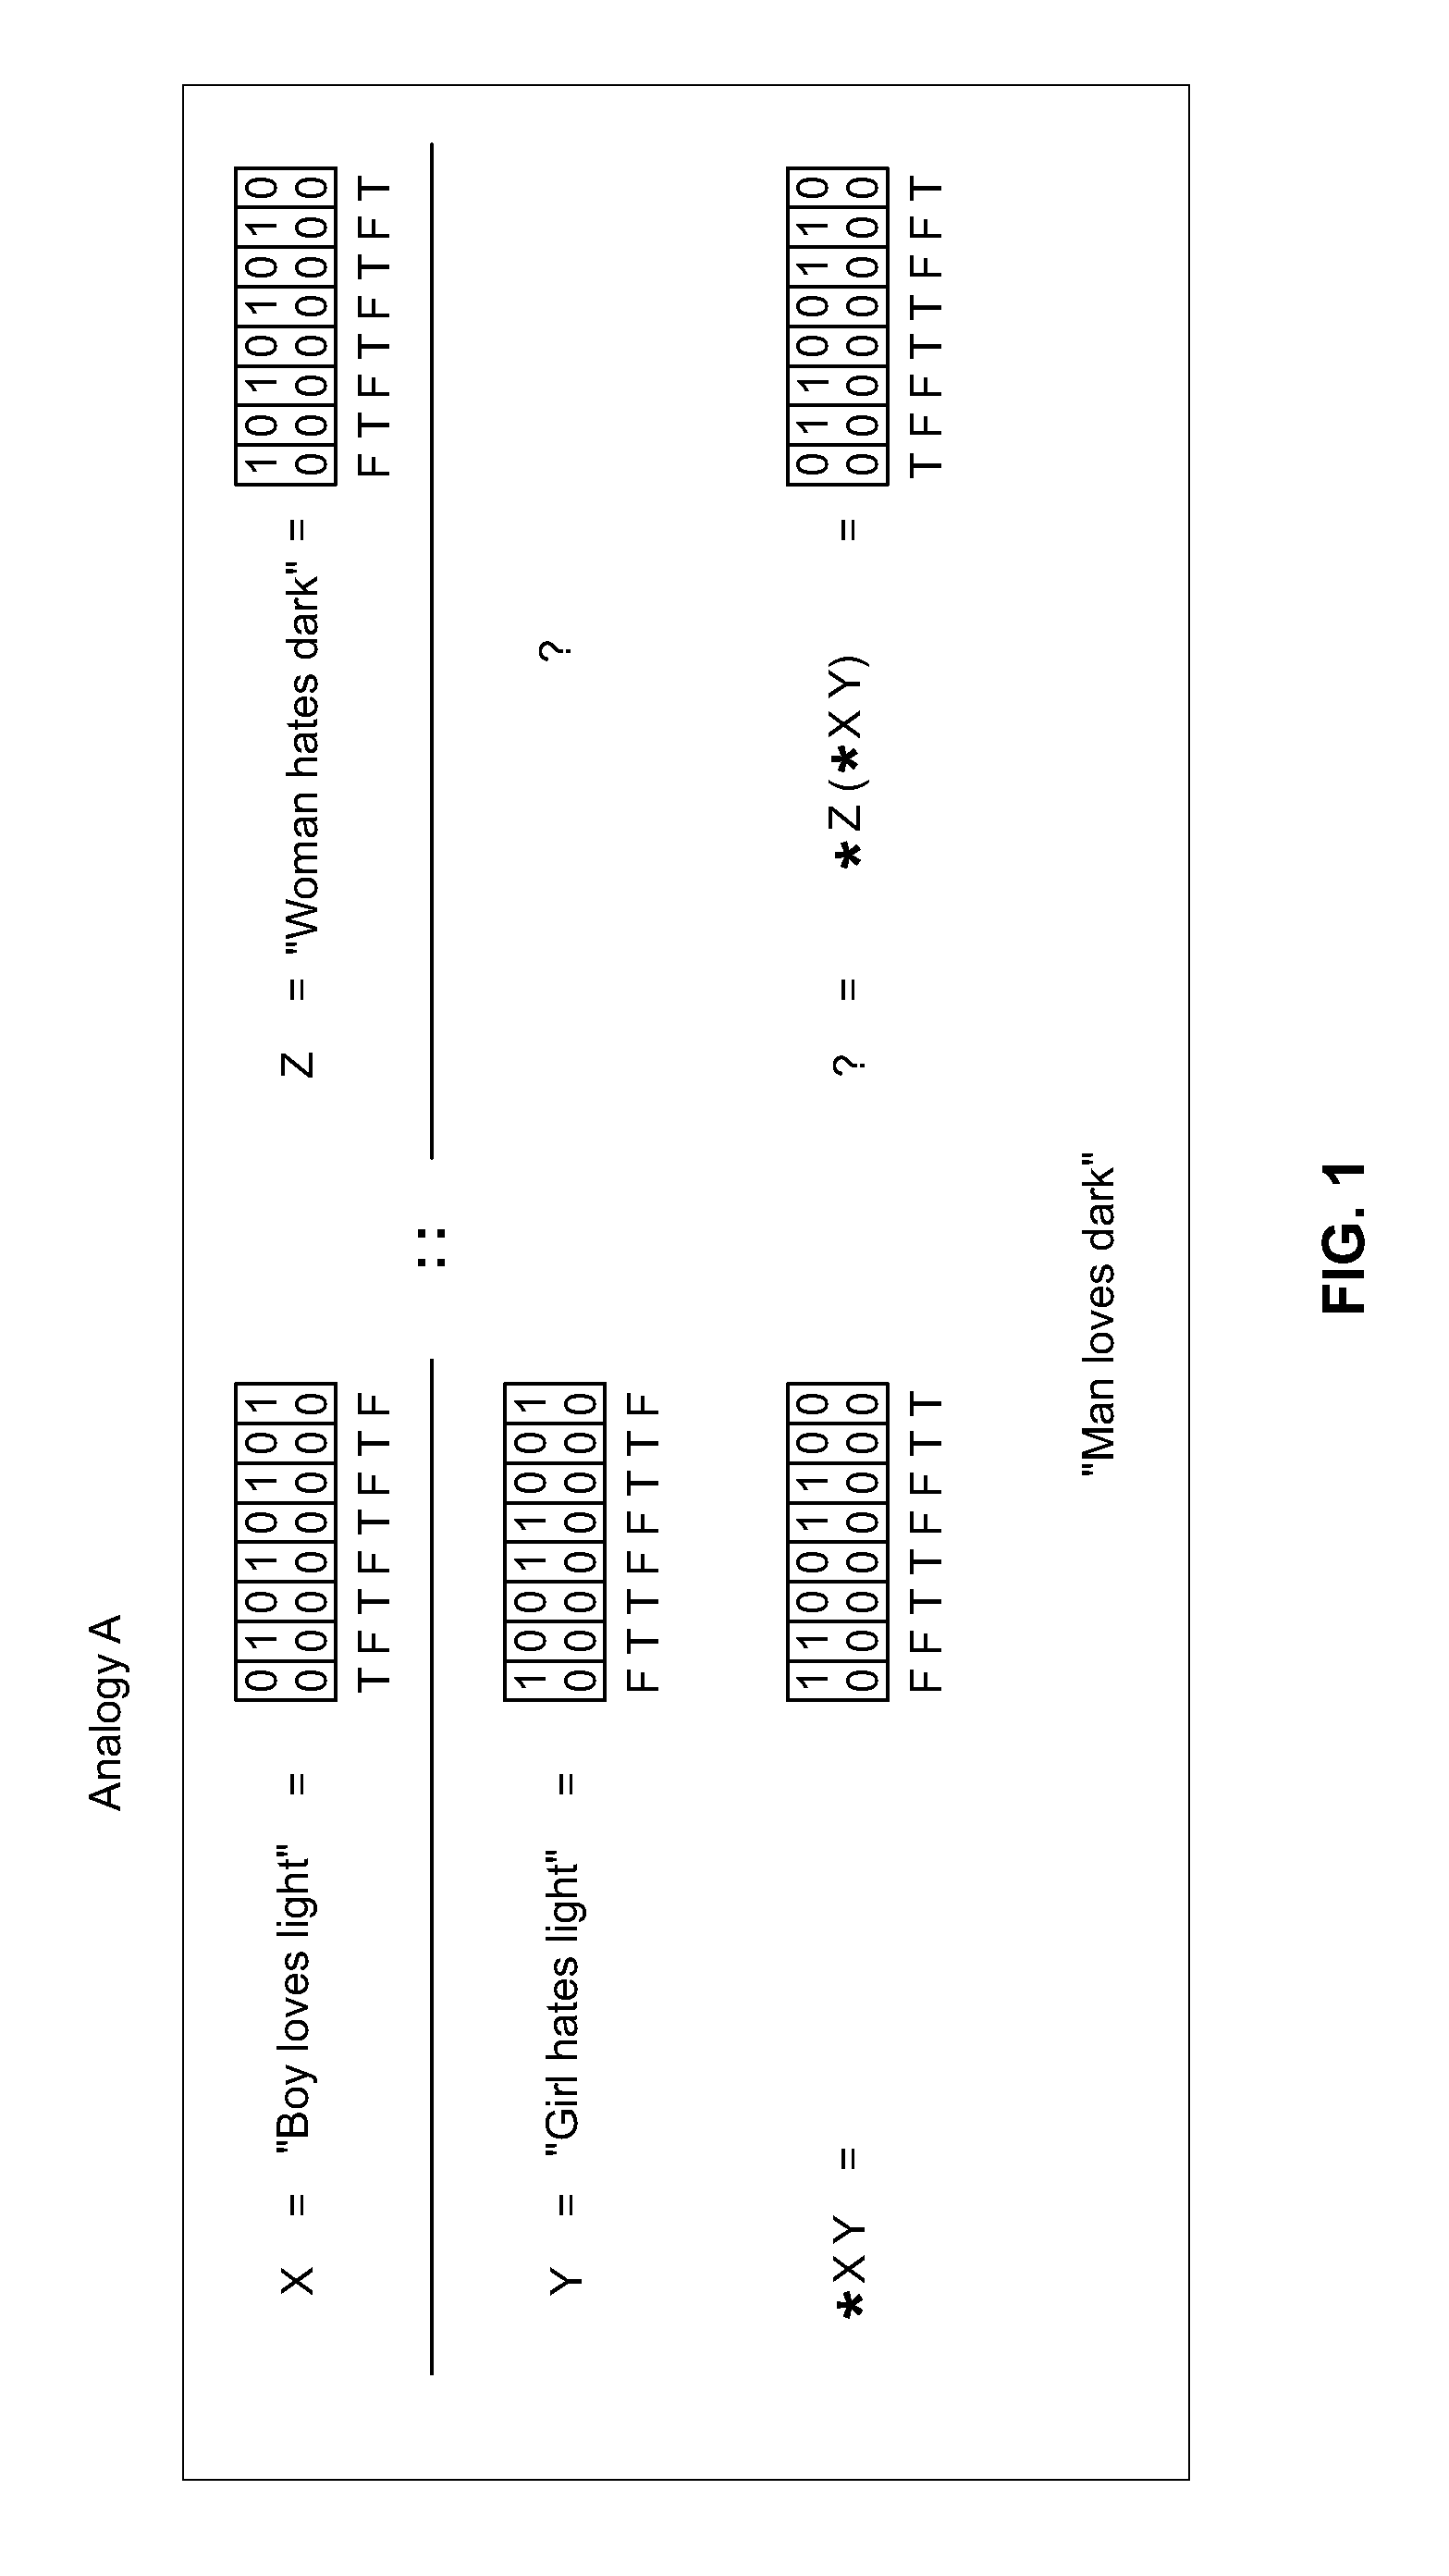 Methods and Systems of Four Valued Analogical Transformation Operators Used in Natural Language Processing and Other Applications